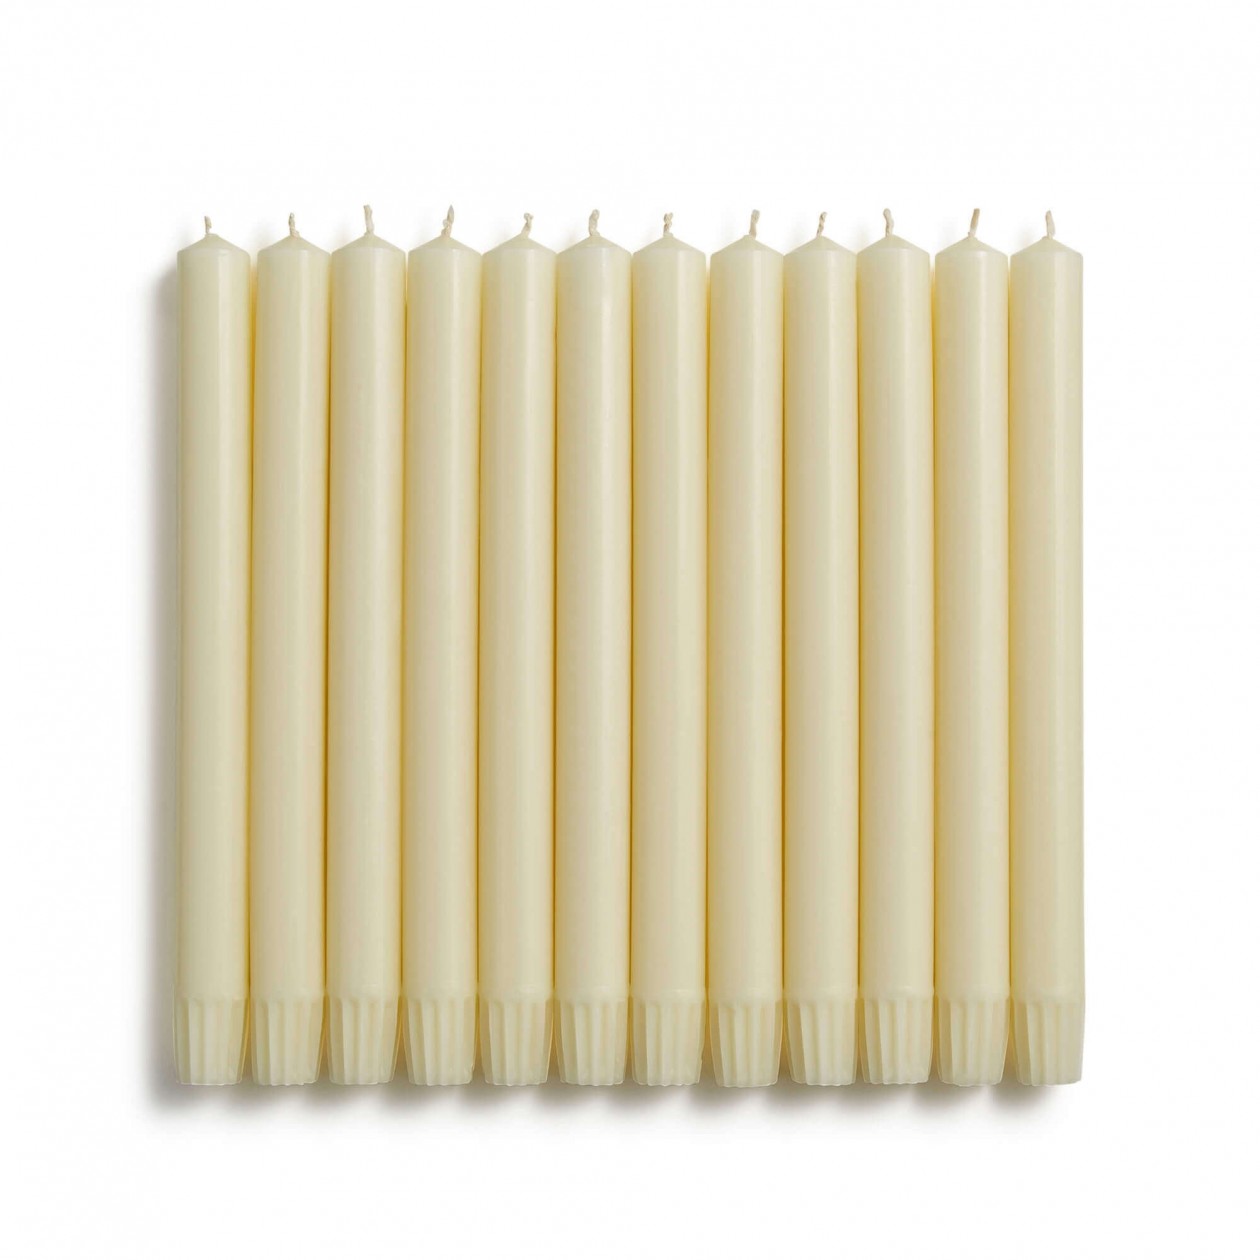 Wax Ivory Candles 20cm long pack of 25